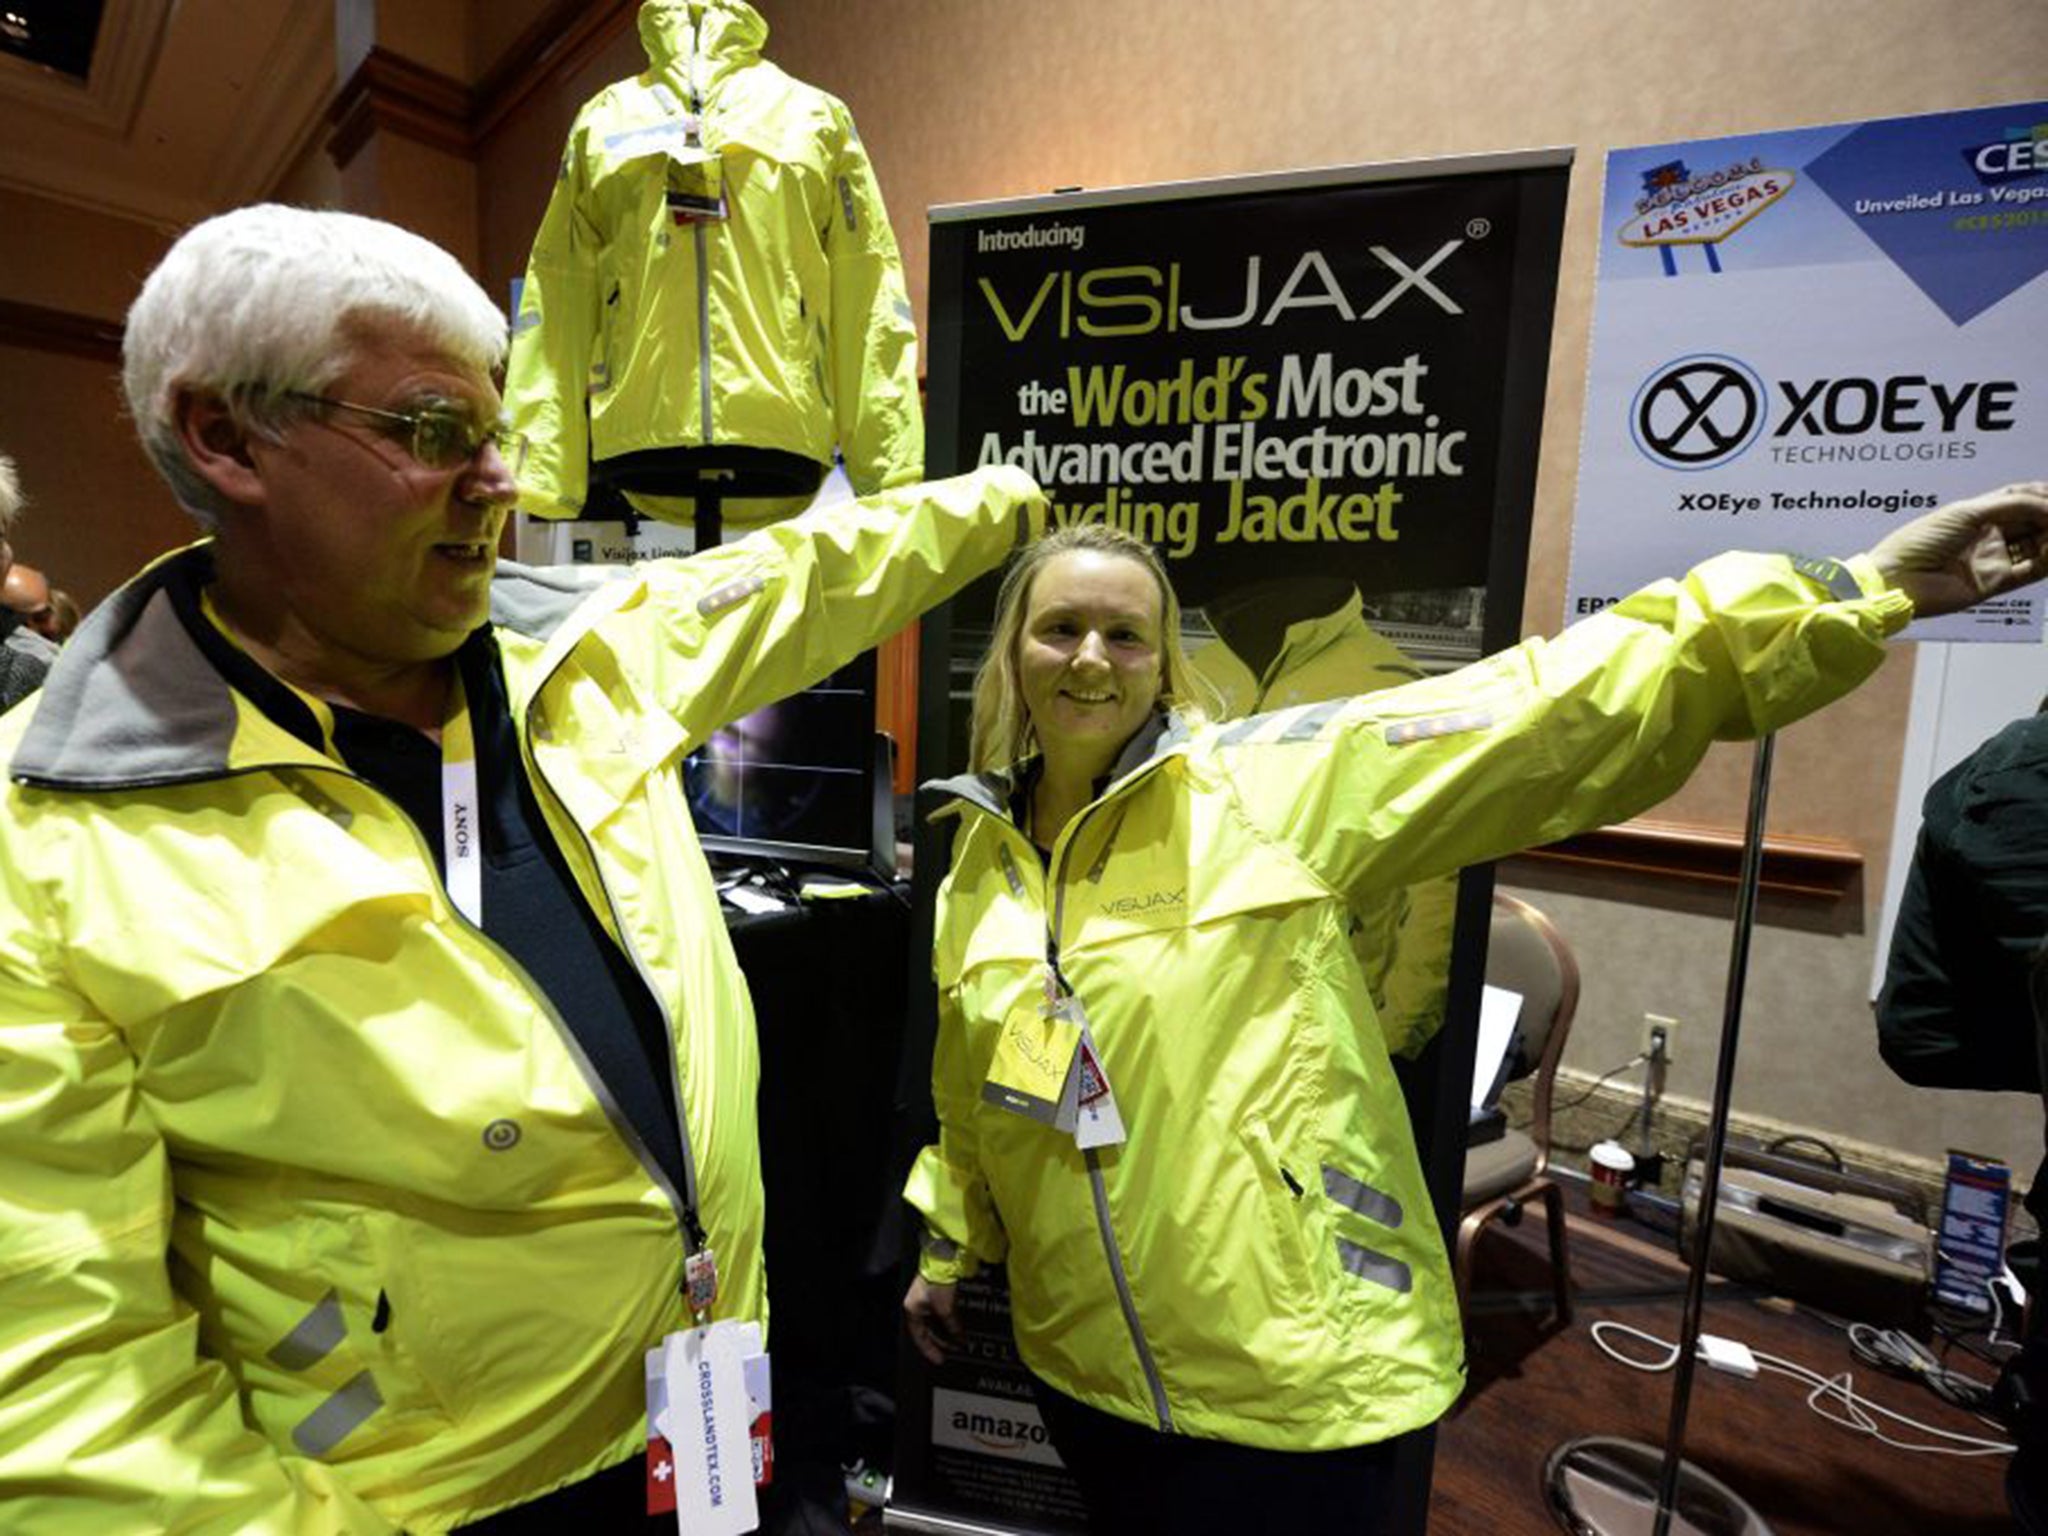 Mark Bernstein and Angela Cairns from British firm Wearable Technologies show their electronic cycling jacket in Las Vegas